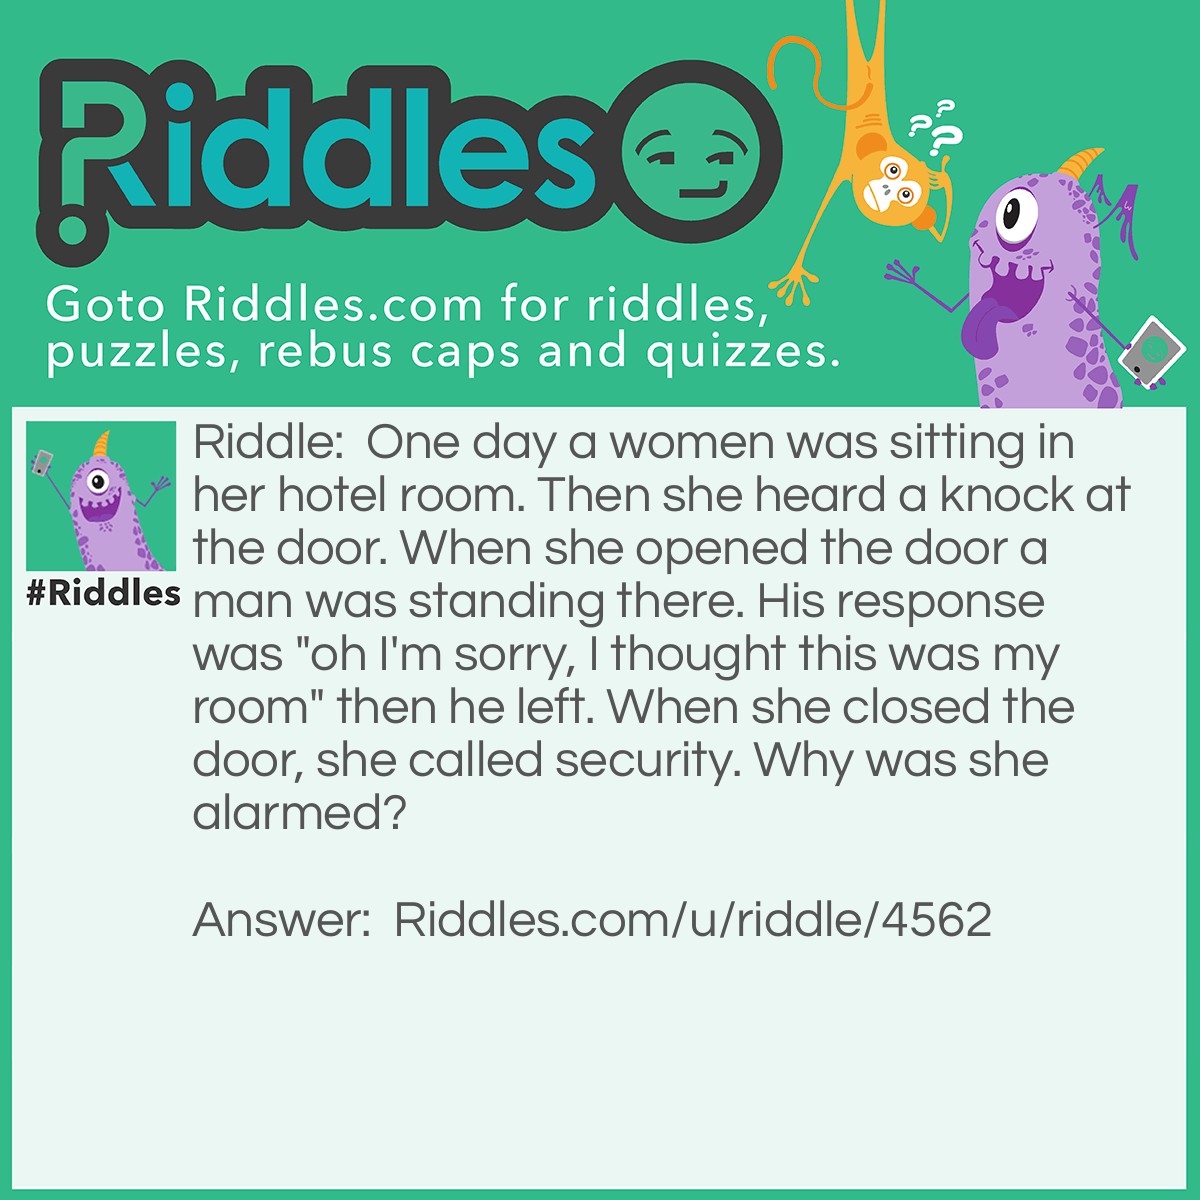 Riddle: One day a women was sitting in her hotel room. Then she heard a knock at the door. When she opened the door a man was standing there. His response was "oh I'm sorry, I thought this was my room" then he left. When she closed the door, she called security. Why was she alarmed? Answer: You usually don't knock at your own hotel room.